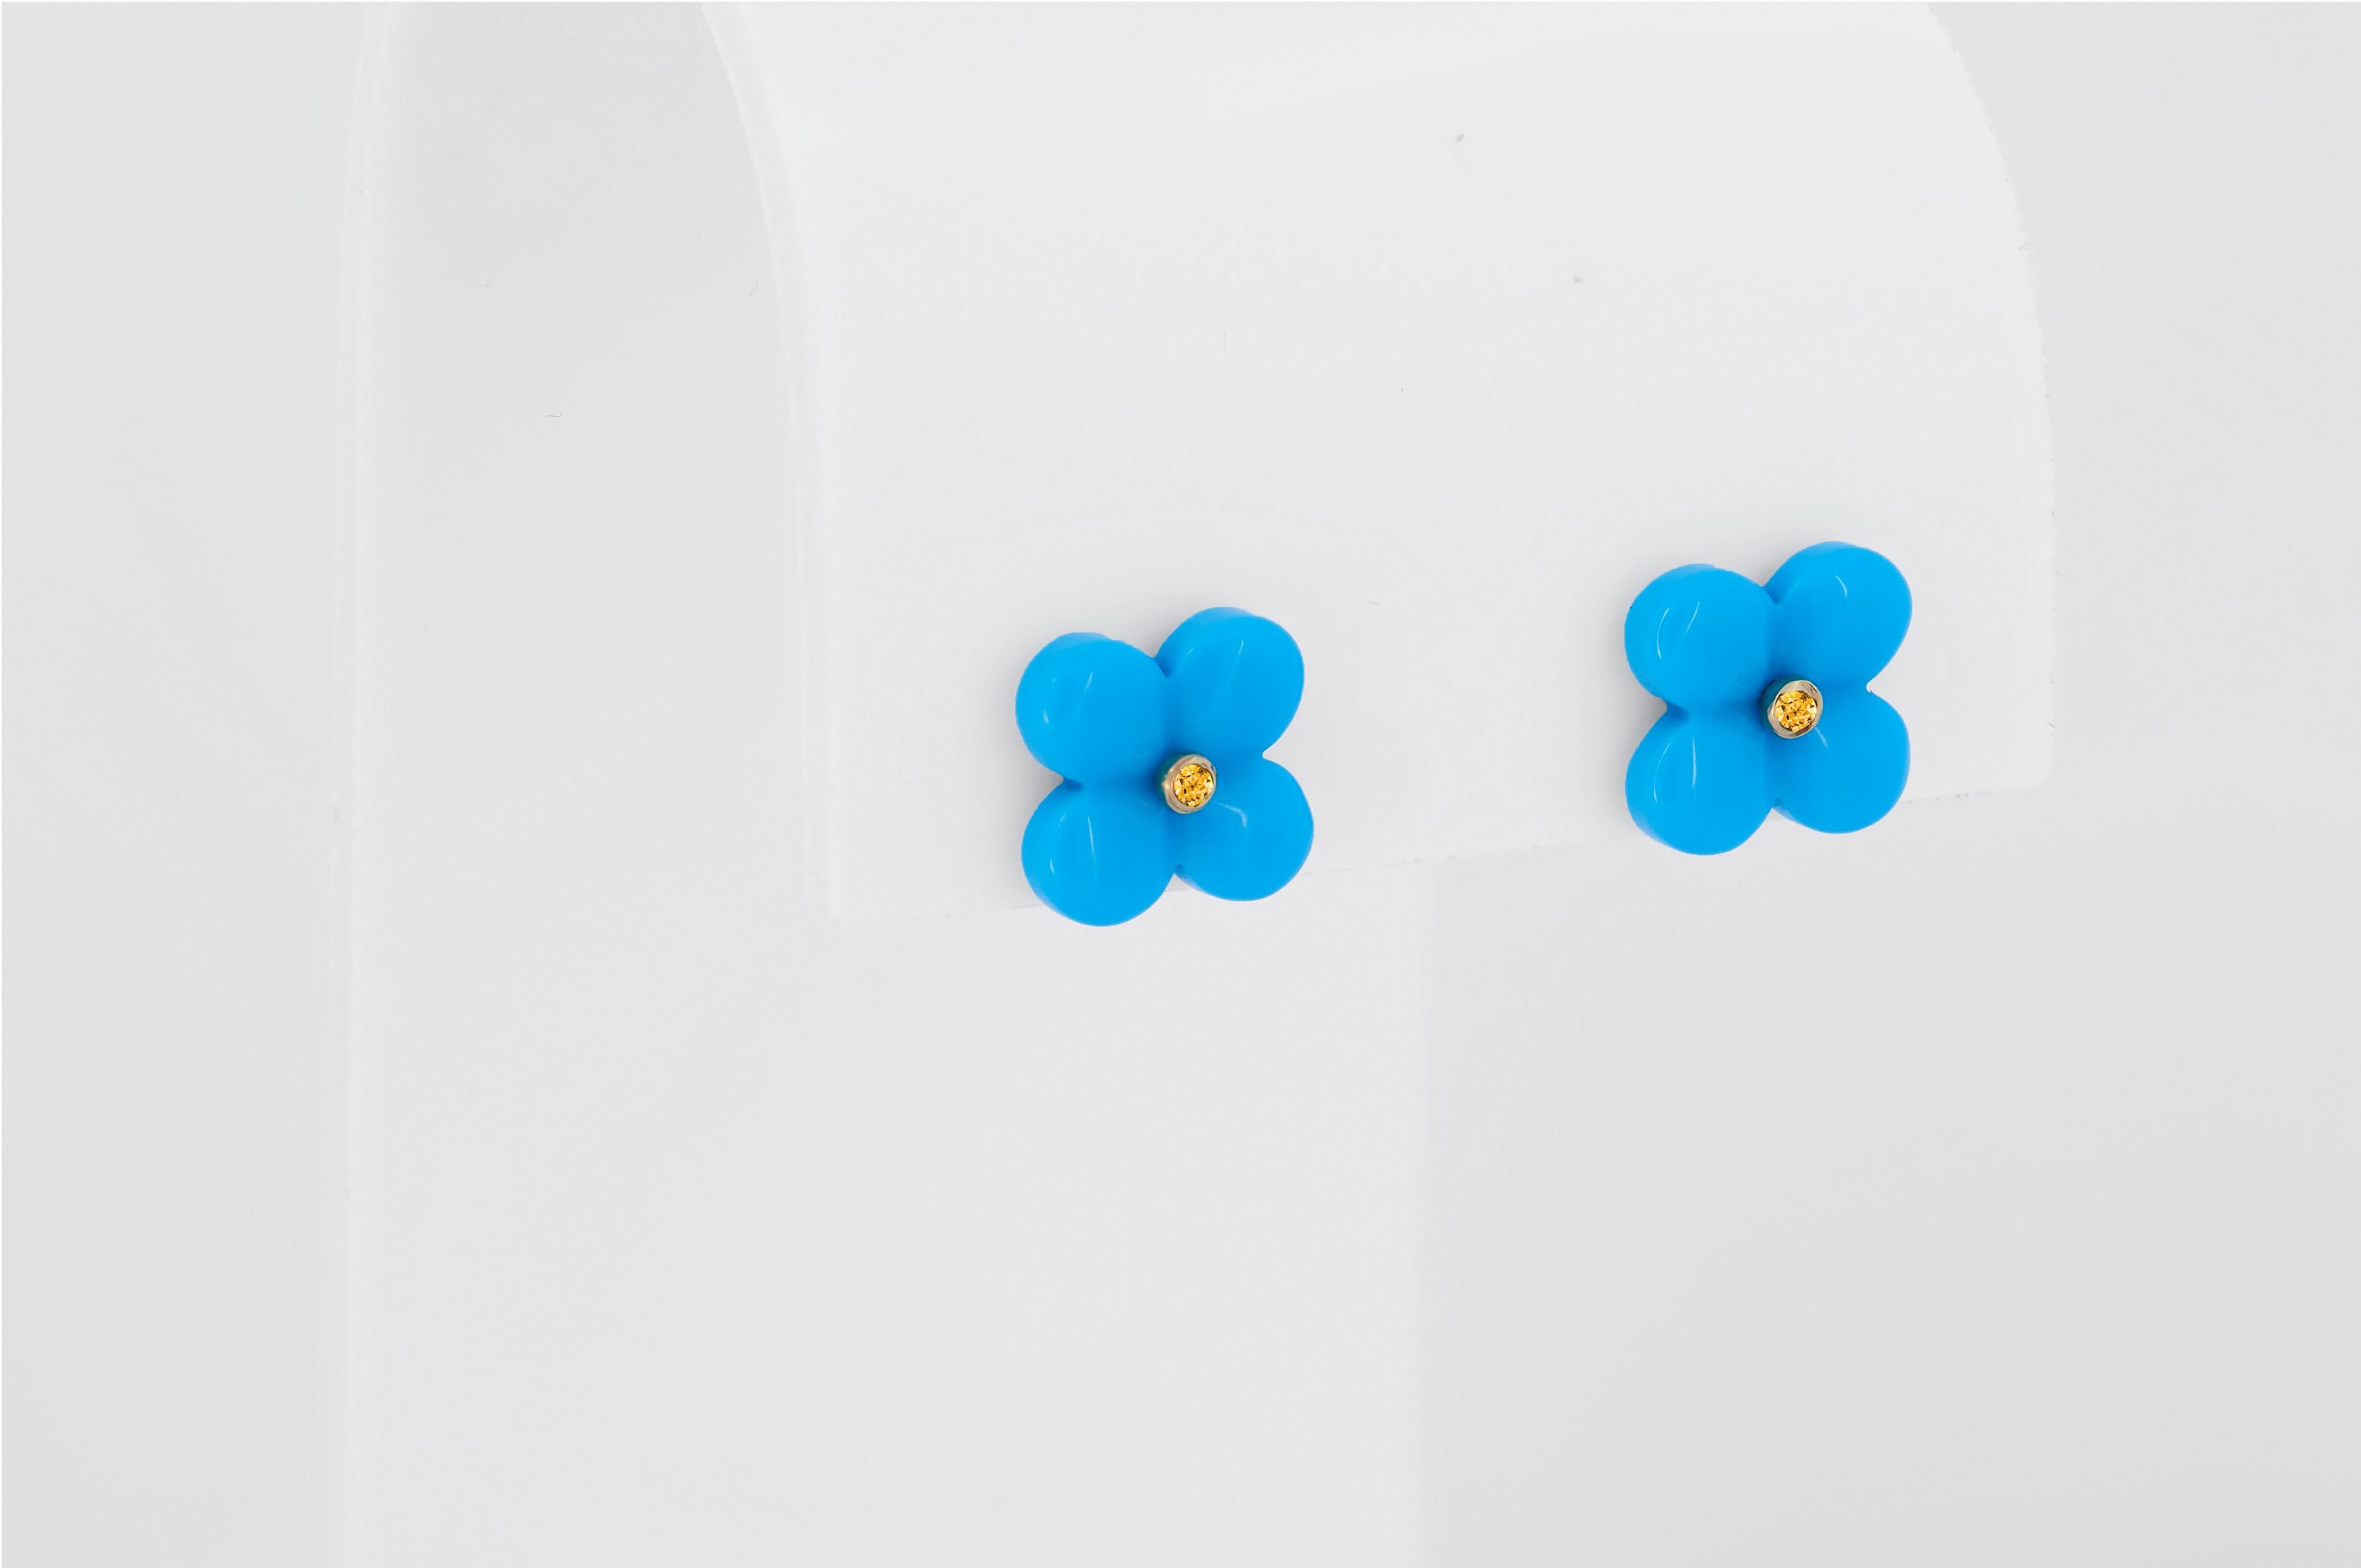 14k gold carved turquoise flower earrings studs. 4 petal flower earrings. Turquoise 14k gold earrings. Flower gold earrings. Blue flower wedding earrings.

Earring can be worn with flowers or without. 
Metal: 14k gold 
Weight: 1.2 gr.
Earrings face: